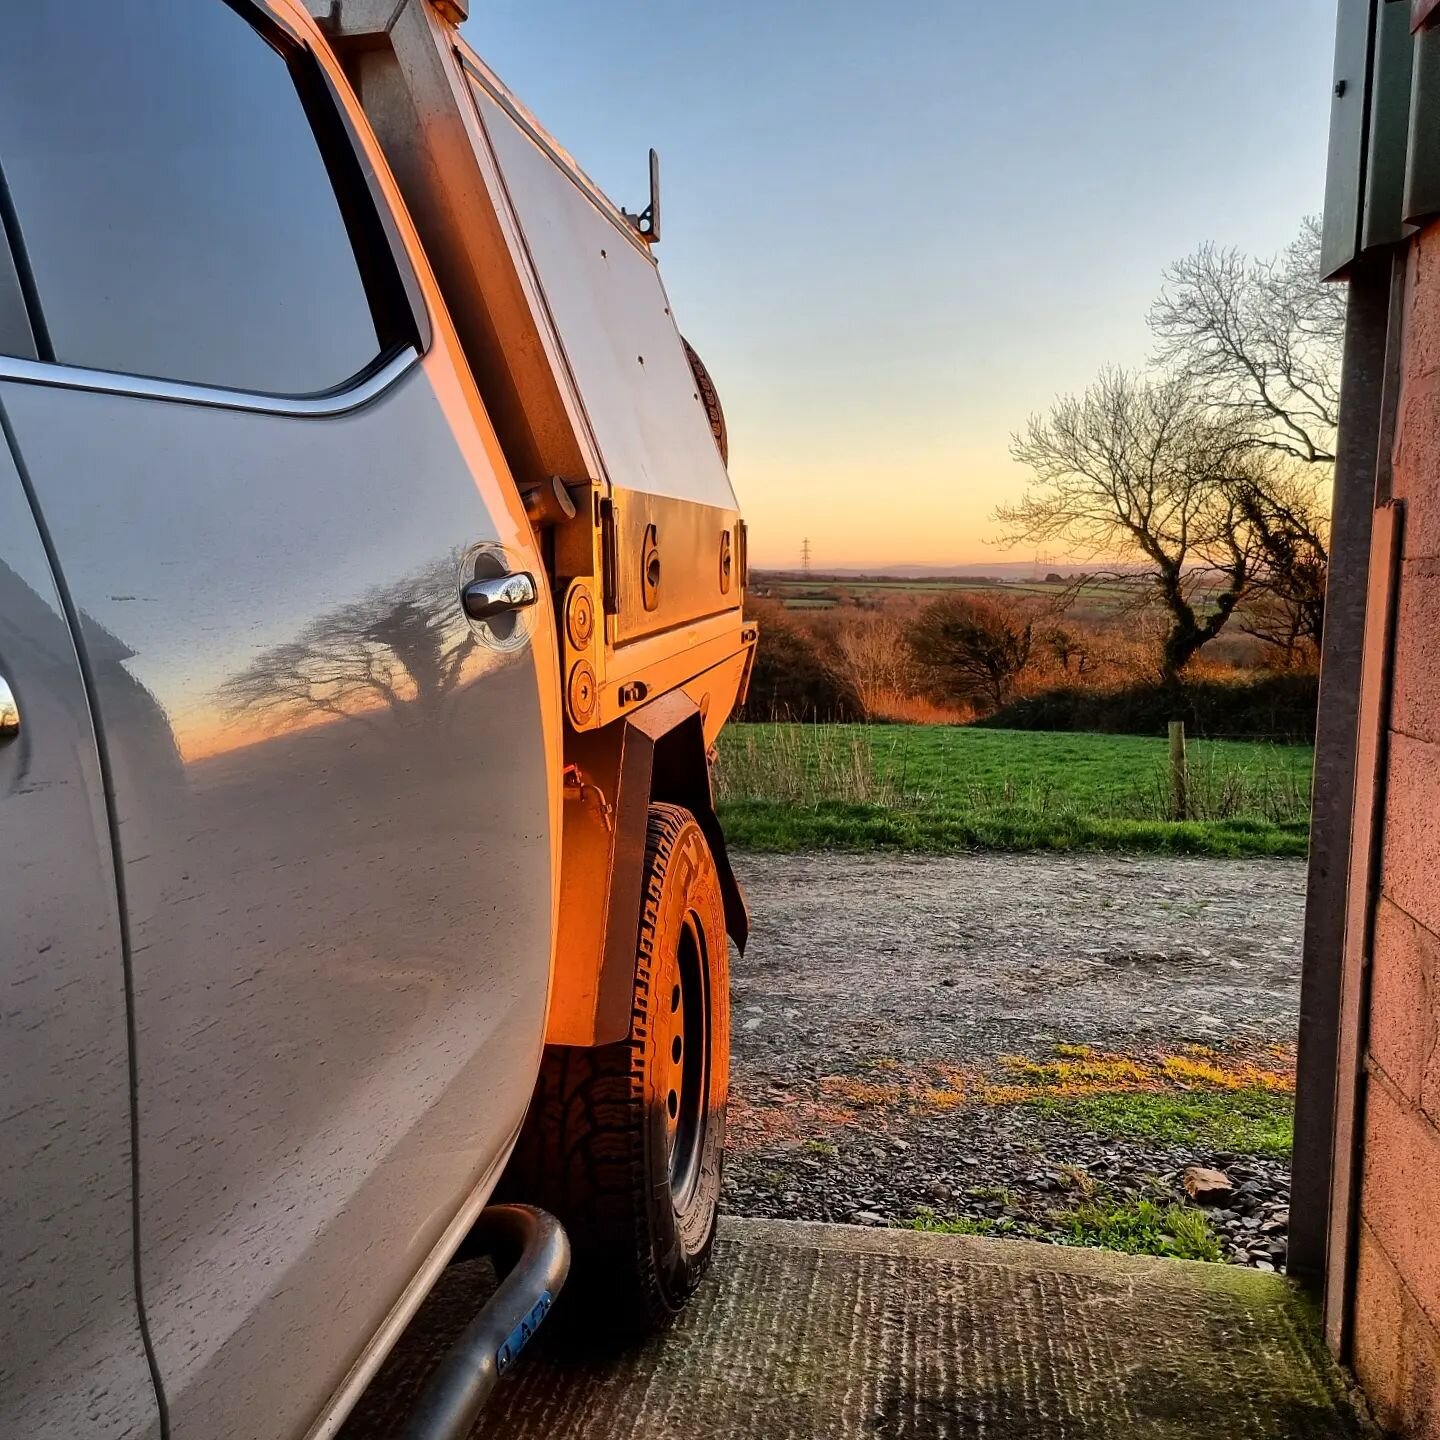 Now it's turned drier and colder, we've had some cracking sunsets at the #LAO workshop. 

#nissan #navara #nissannavara #np300 #custom #lao #doublecab #pickup #trayback #demountablecanopy #canopy #offroad #offroadfabrication #4wheeling #4x4 #bespokef